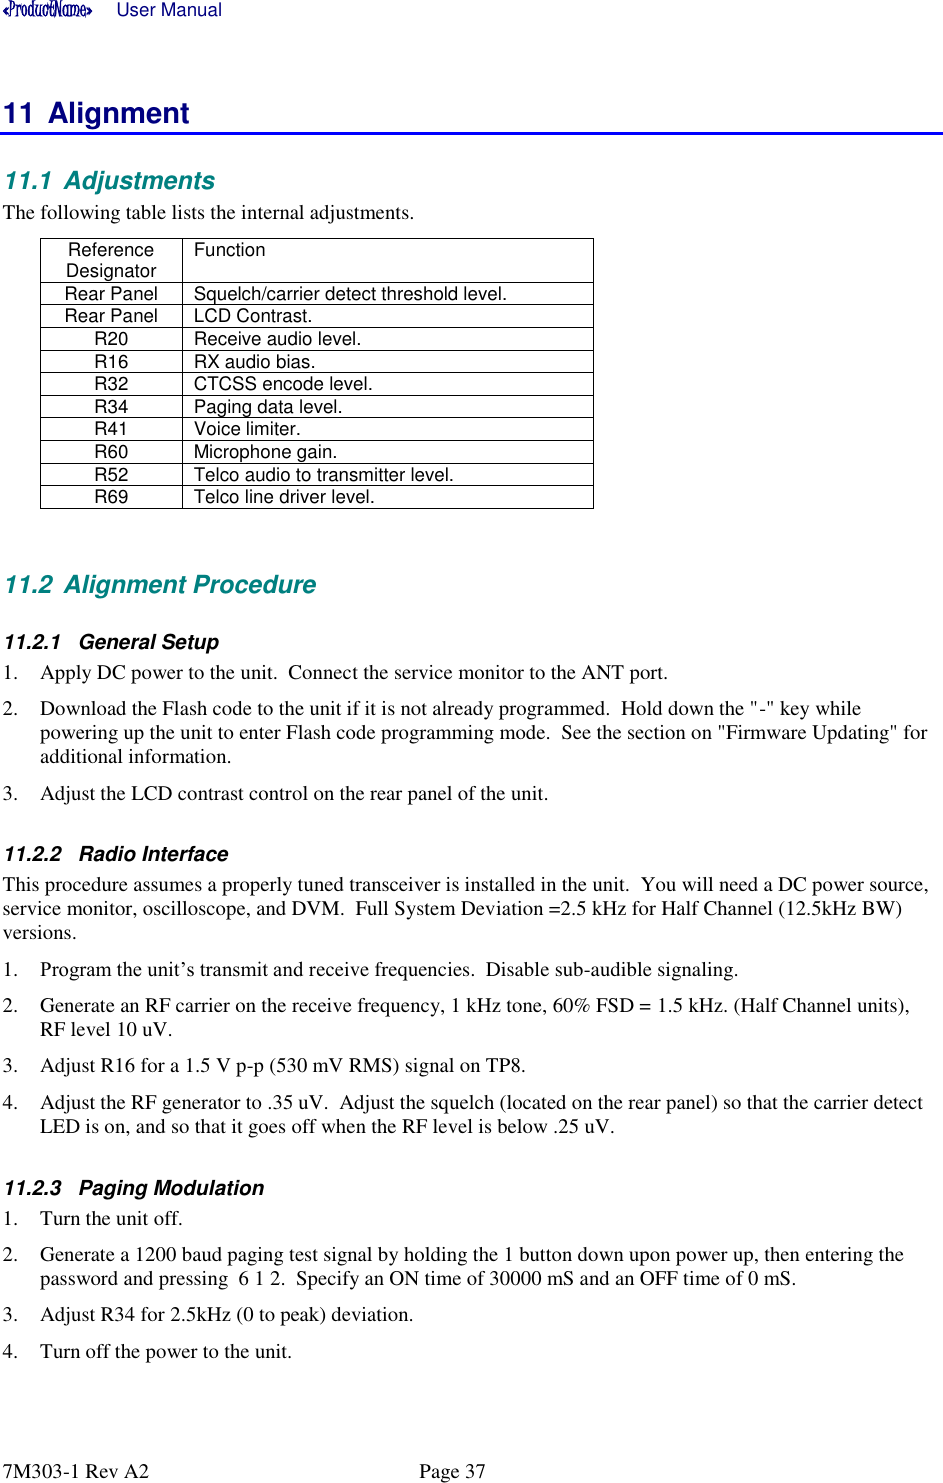 «ProductName»      User Manual      7M303-1 Rev A2  Page 37 11 Alignment 11.1  Adjustments The following table lists the internal adjustments.   Reference Designator Function  Rear Panel Squelch/carrier detect threshold level.  Rear Panel LCD Contrast.  R20 Receive audio level.   R16 RX audio bias.   R32 CTCSS encode level.   R34 Paging data level.   R41 Voice limiter.   R60 Microphone gain.   R52 Telco audio to transmitter level.  R69 Telco line driver level.    11.2  Alignment Procedure 11.2.1  General Setup 1. Apply DC power to the unit.  Connect the service monitor to the ANT port.  2. Download the Flash code to the unit if it is not already programmed.  Hold down the &quot;-&quot; key while powering up the unit to enter Flash code programming mode.  See the section on &quot;Firmware Updating&quot; for additional information. 3. Adjust the LCD contrast control on the rear panel of the unit. 11.2.2  Radio Interface This procedure assumes a properly tuned transceiver is installed in the unit.  You will need a DC power source, service monitor, oscilloscope, and DVM.  Full System Deviation =2.5 kHz for Half Channel (12.5kHz BW) versions.   1. Program the unit’s transmit and receive frequencies.  Disable sub-audible signaling.   2. Generate an RF carrier on the receive frequency, 1 kHz tone, 60% FSD = 1.5 kHz. (Half Channel units), RF level 10 uV. 3. Adjust R16 for a 1.5 V p-p (530 mV RMS) signal on TP8.  4. Adjust the RF generator to .35 uV.  Adjust the squelch (located on the rear panel) so that the carrier detect LED is on, and so that it goes off when the RF level is below .25 uV.  11.2.3  Paging Modulation 1. Turn the unit off.  2. Generate a 1200 baud paging test signal by holding the 1 button down upon power up, then entering the password and pressing  6 1 2.  Specify an ON time of 30000 mS and an OFF time of 0 mS. 3. Adjust R34 for 2.5kHz (0 to peak) deviation. 4. Turn off the power to the unit.  